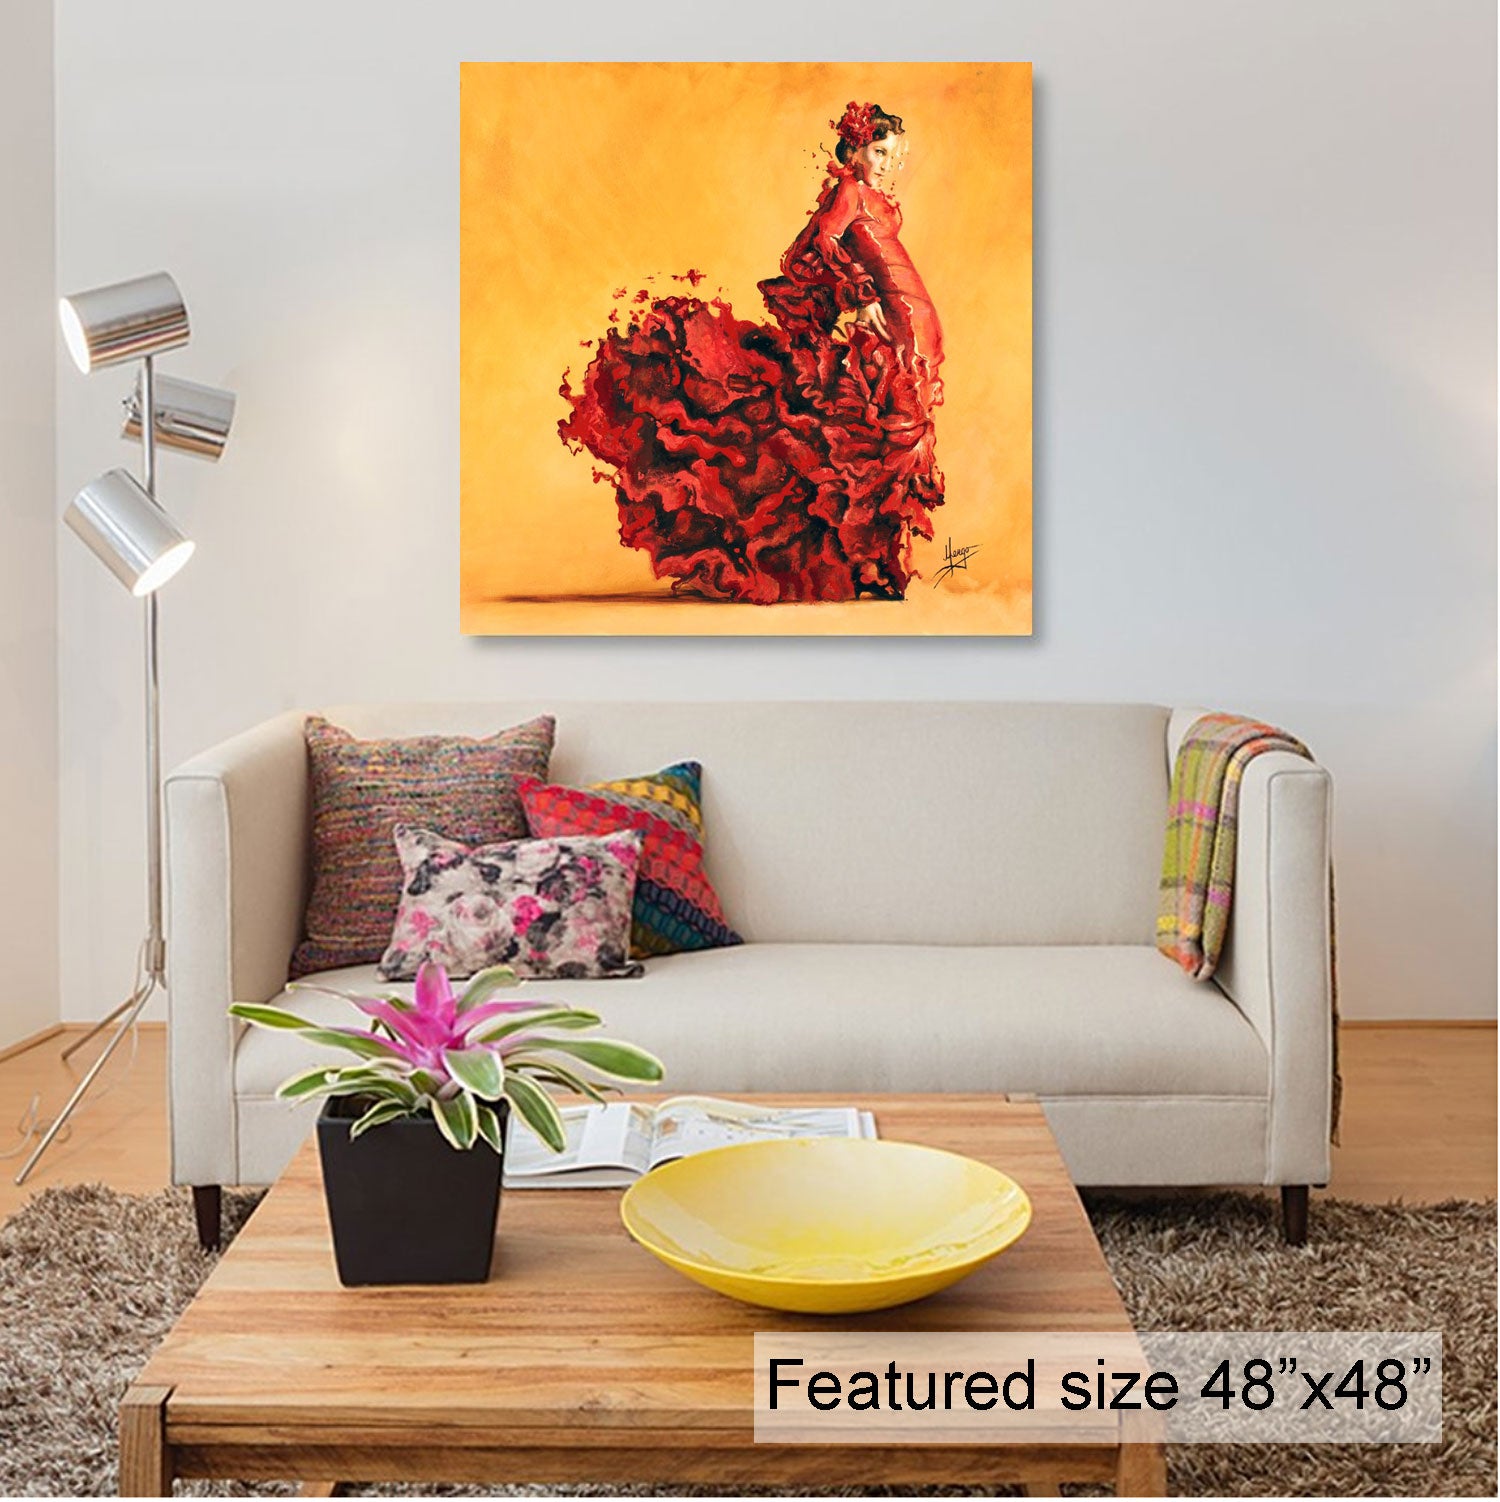 “Passion” Flamenco woman dancer painting embellished